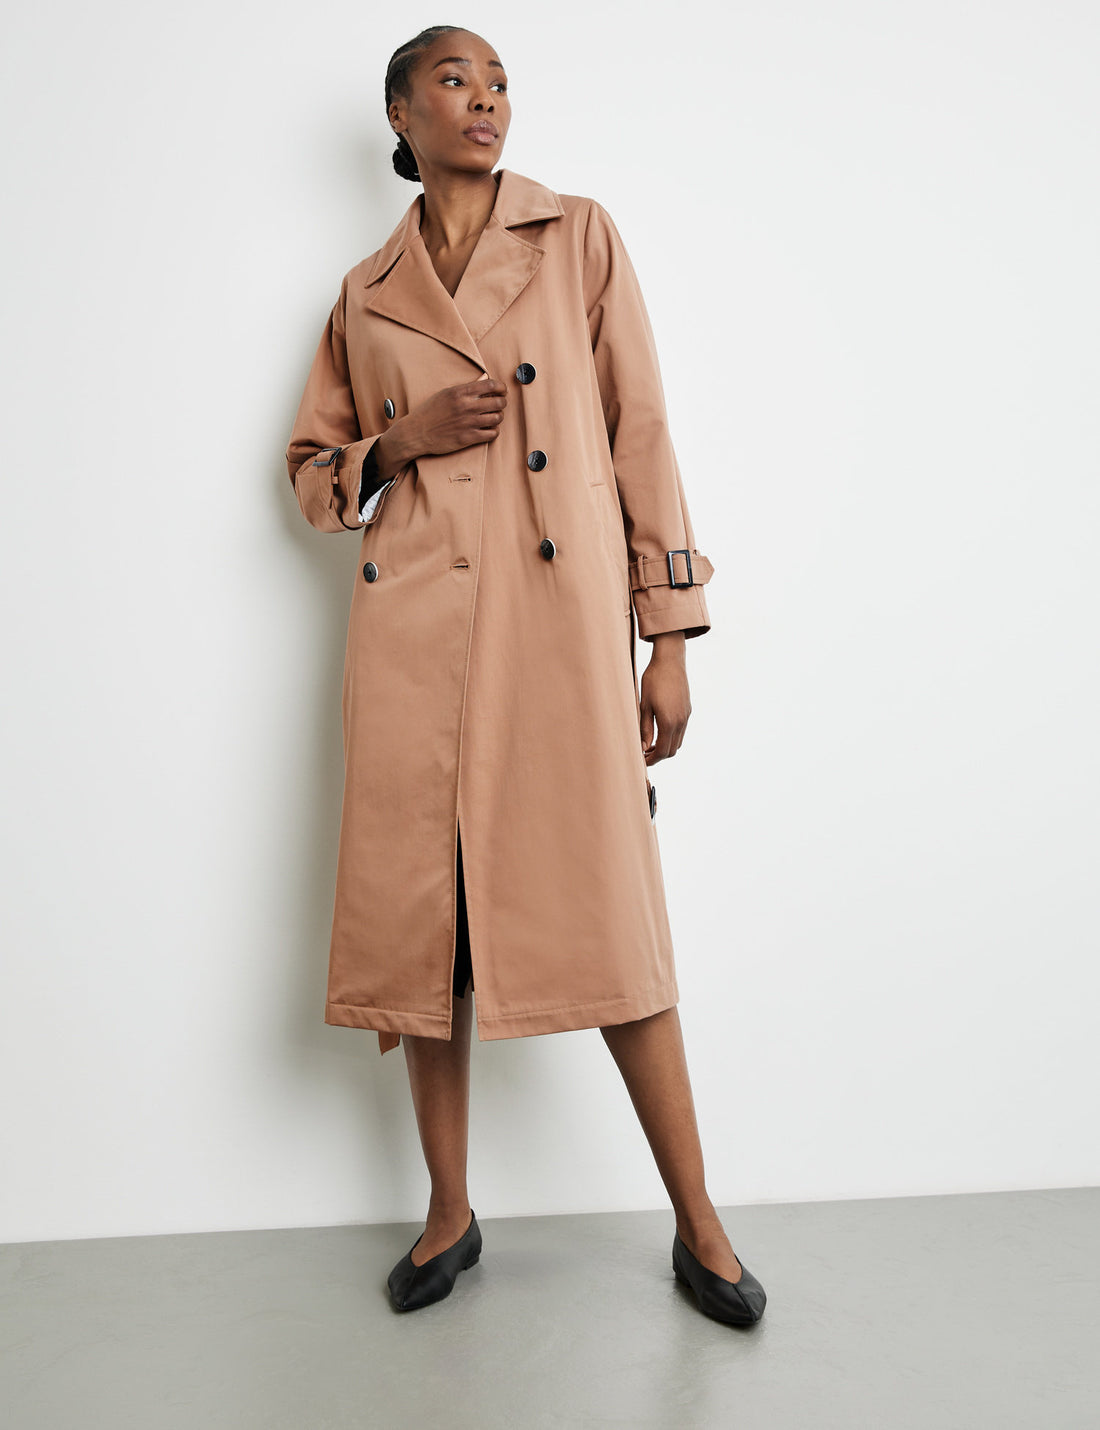 Classic Trench Coat With A Tie-Around Belt_350002-31178_70243_01